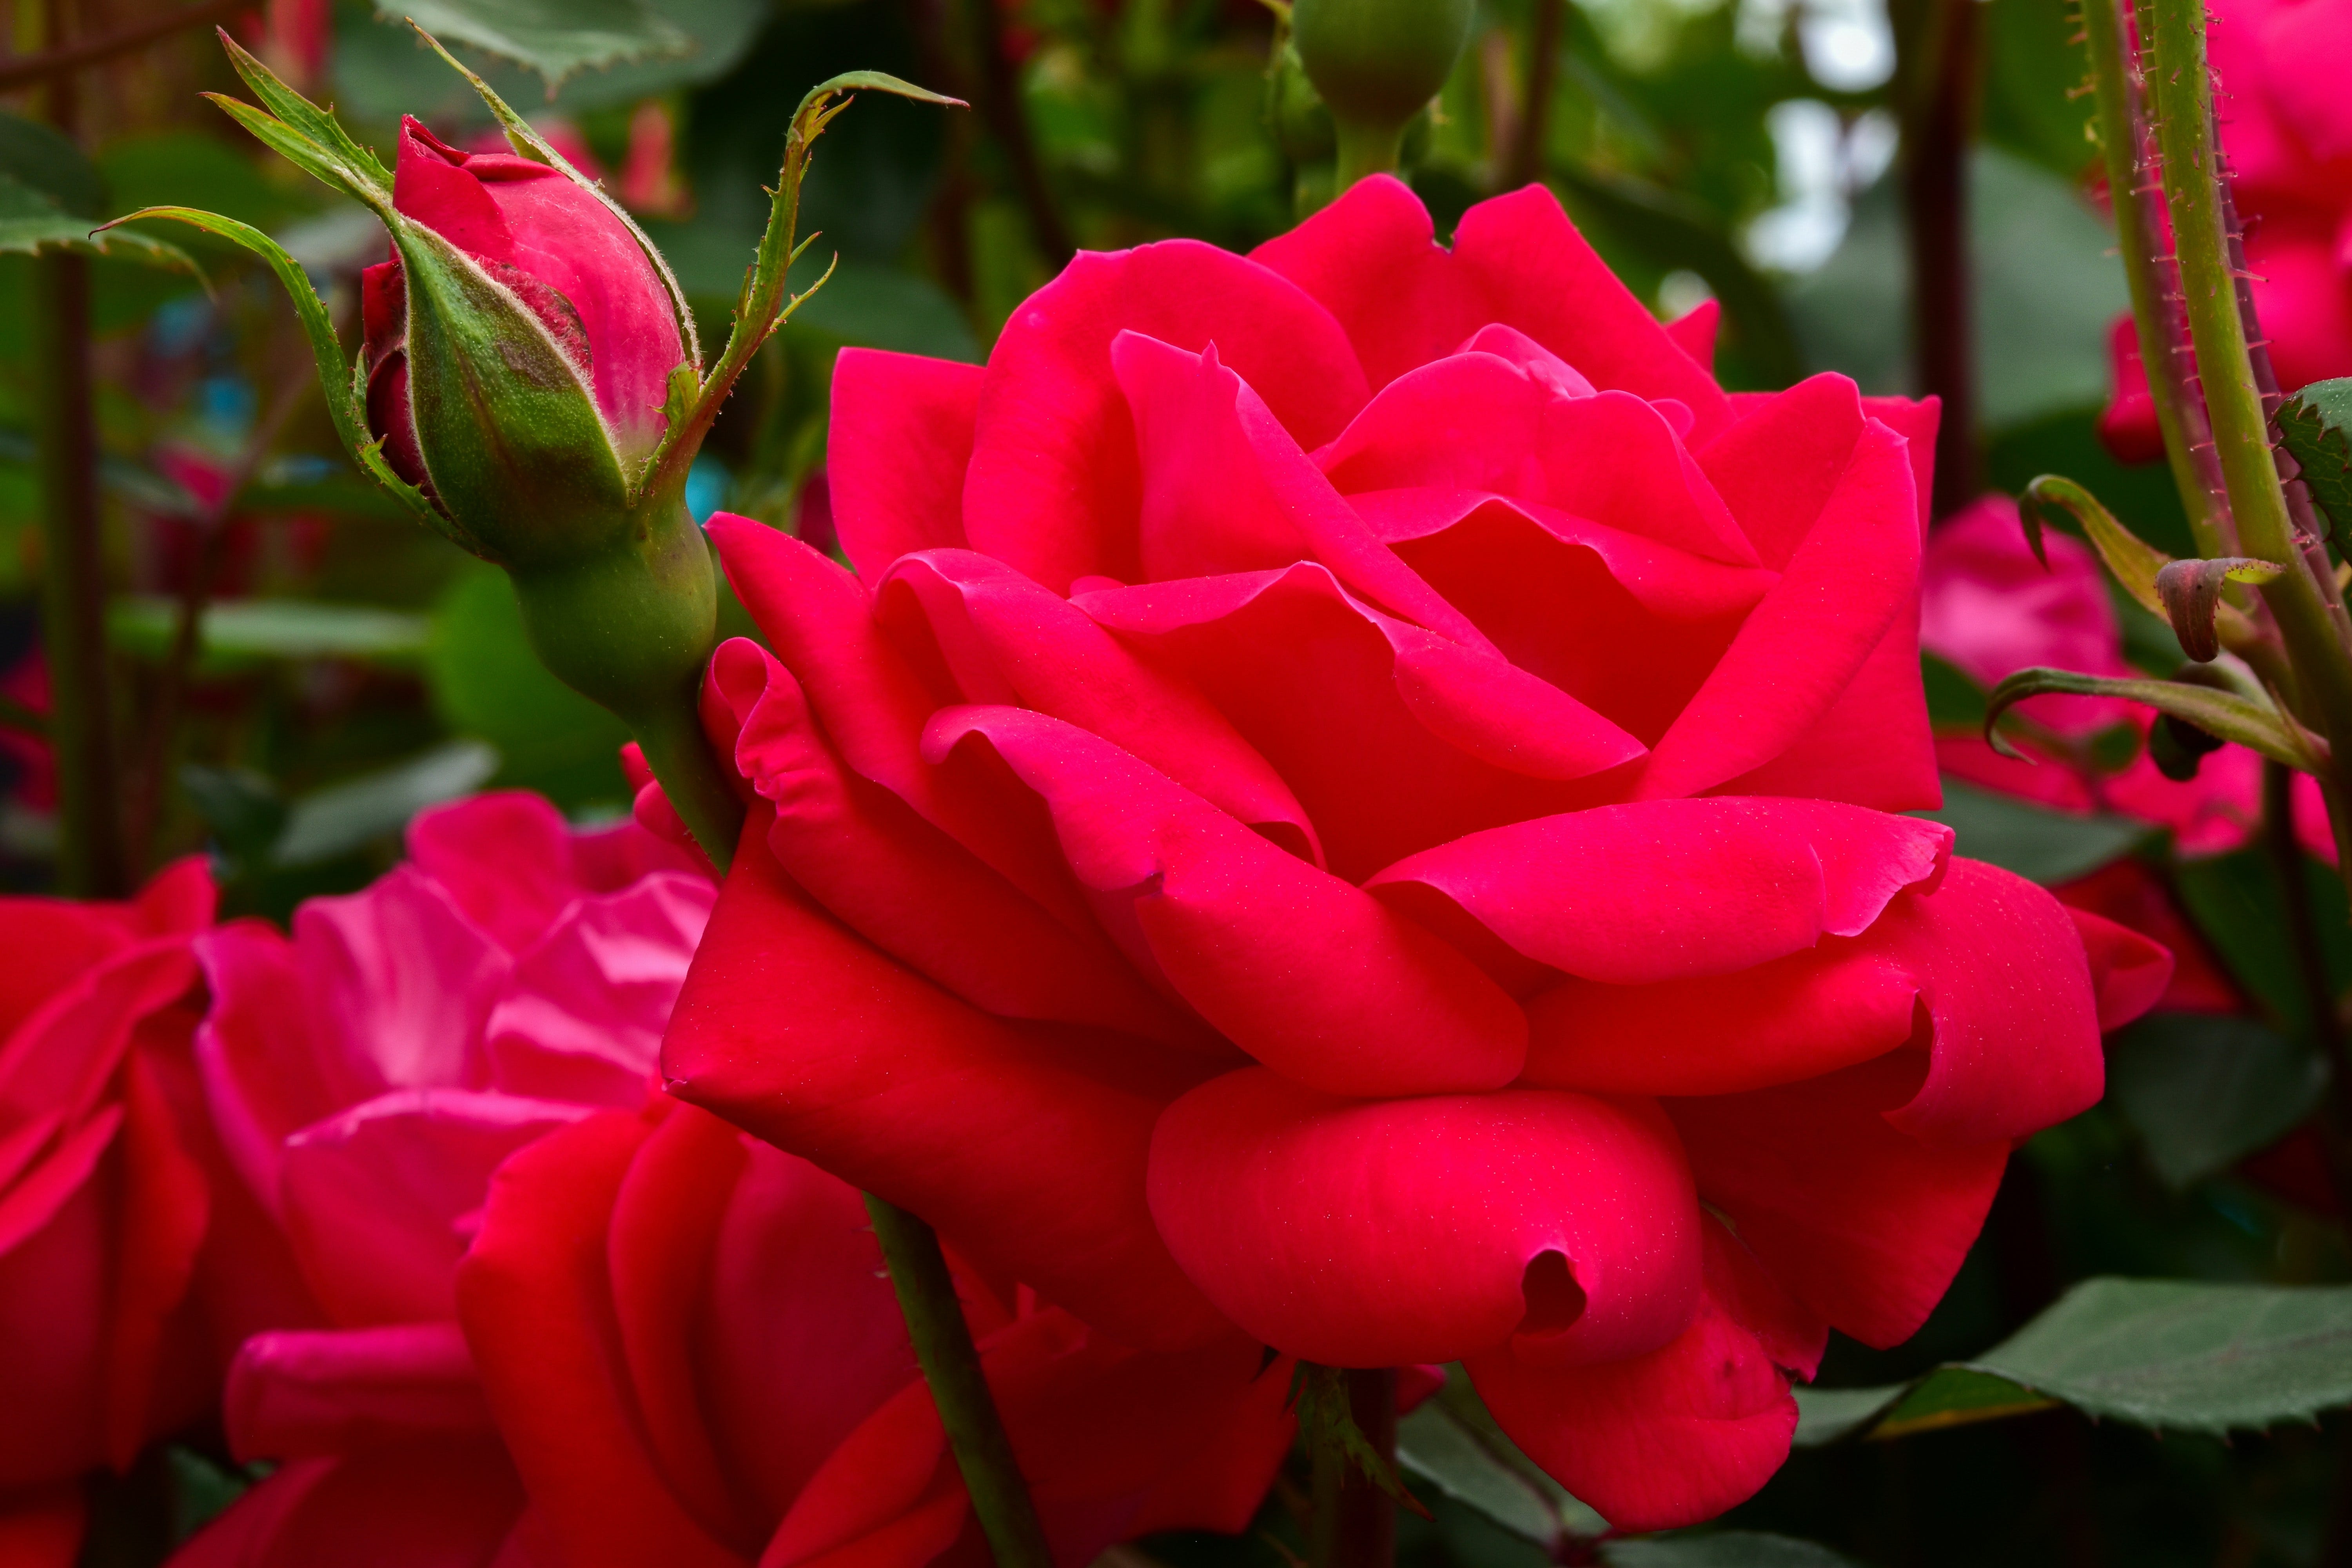 A close-up color photograph of several red roses on a bush in full bloom along with a few buds.